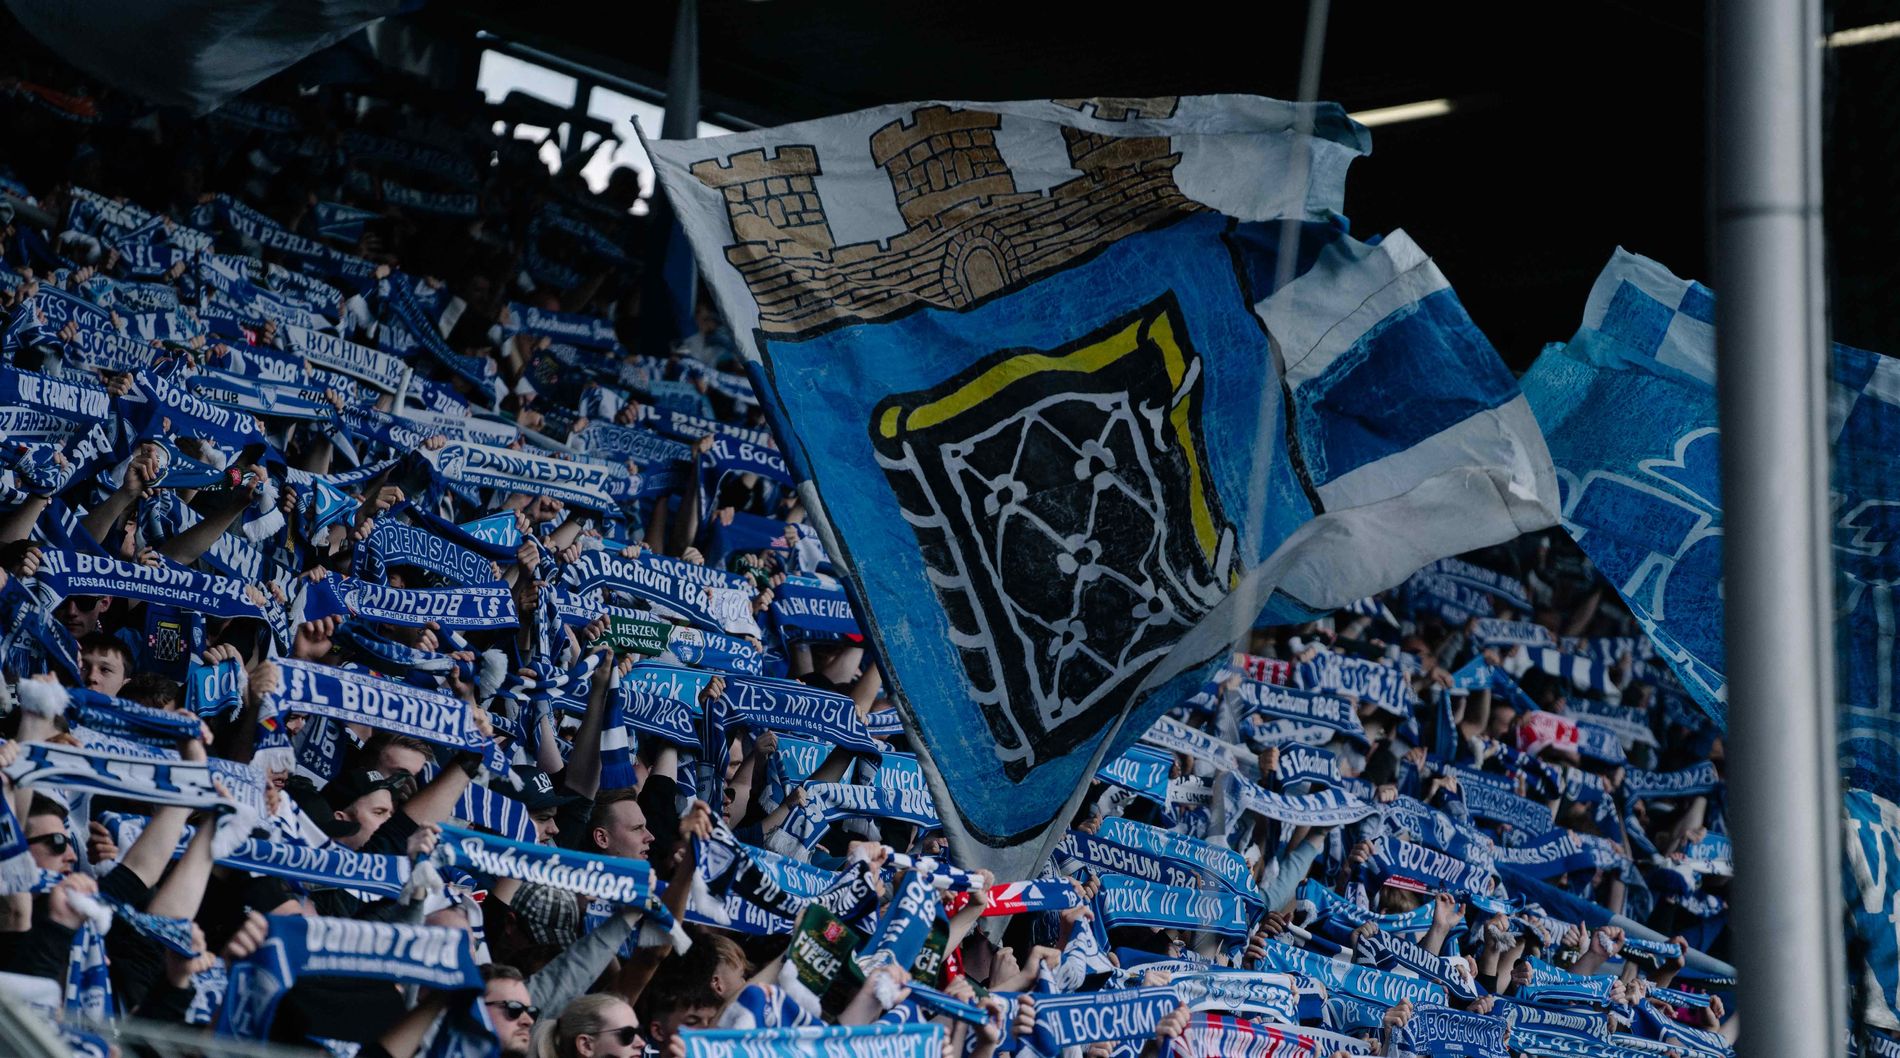 VfL Bochum 1848: A Reflection of the Ruhr